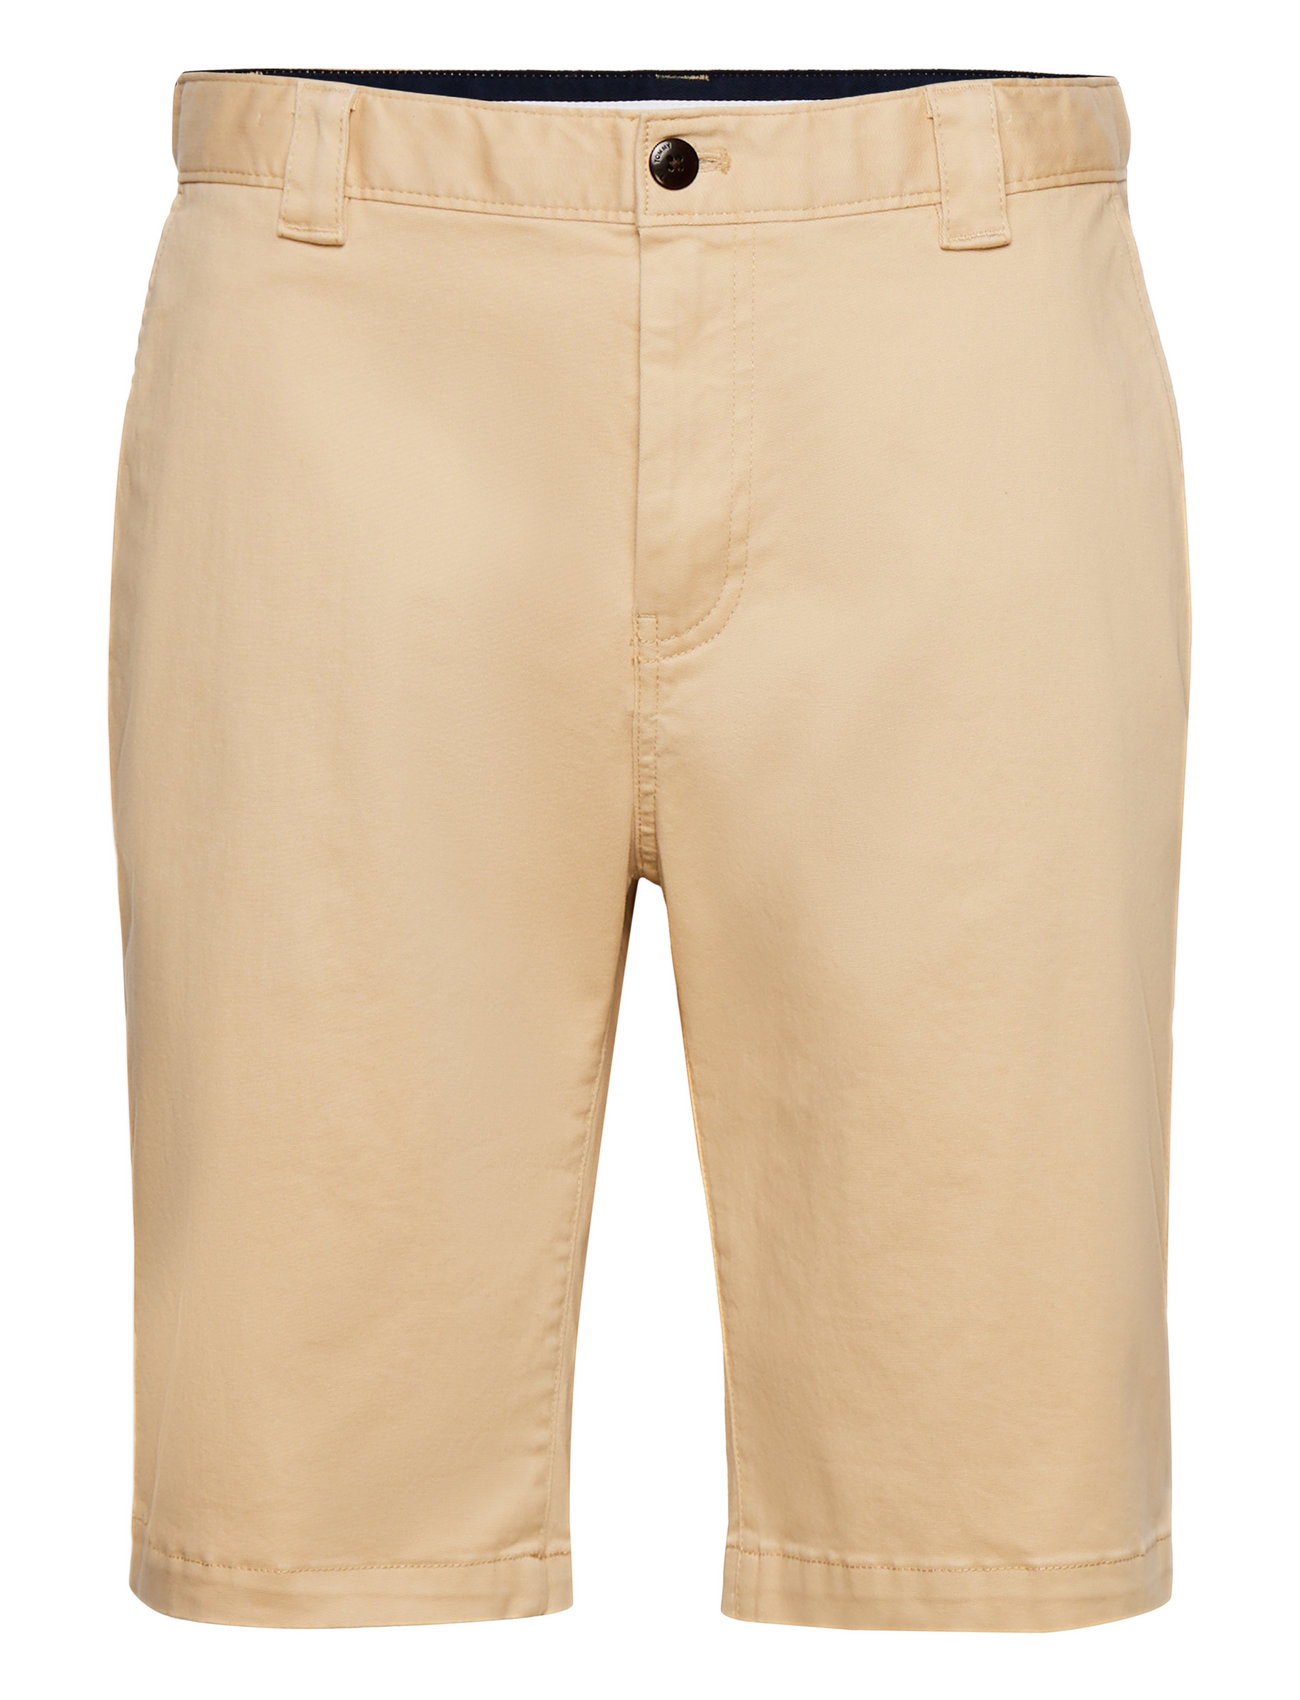 Tjm Scanton Chino Short Bottoms Shorts Chinos Shorts Beige Tommy Jeans